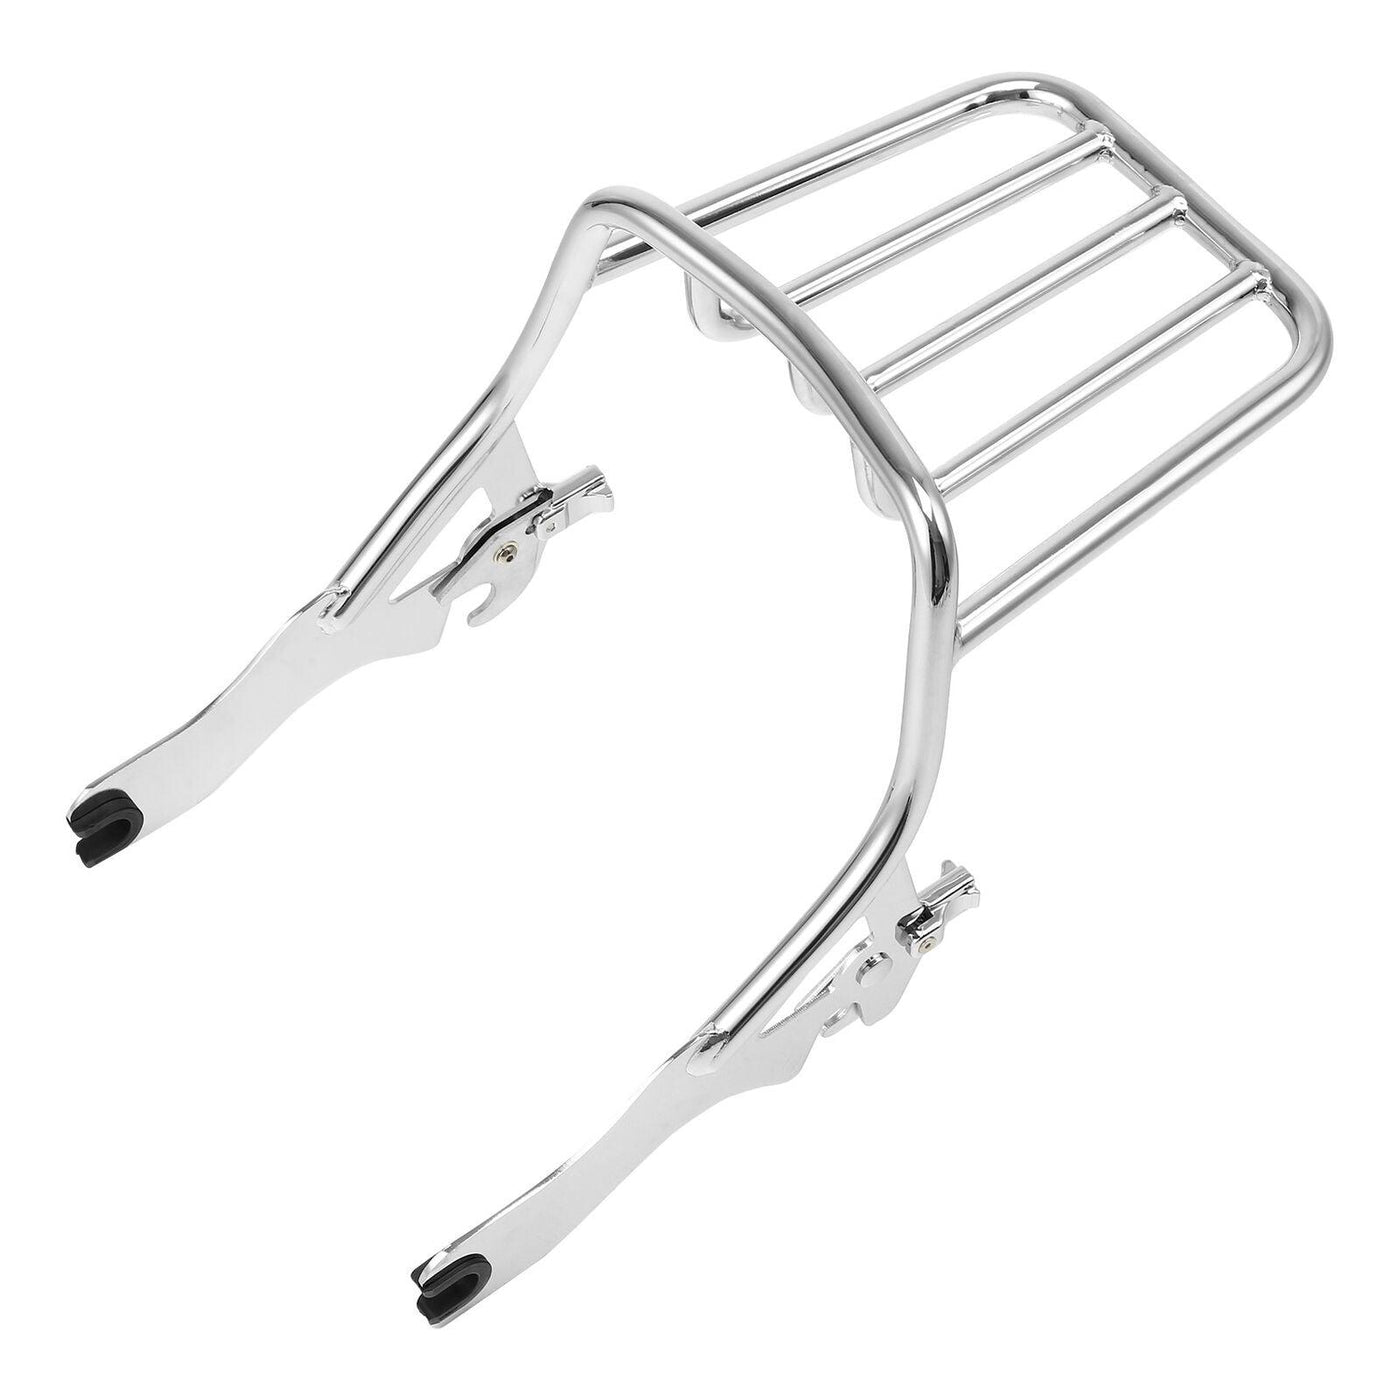 Chrome Two-up Luggage Rack Fit For Harley Softail Street Bob Slim 2018-2021 - Moto Life Products